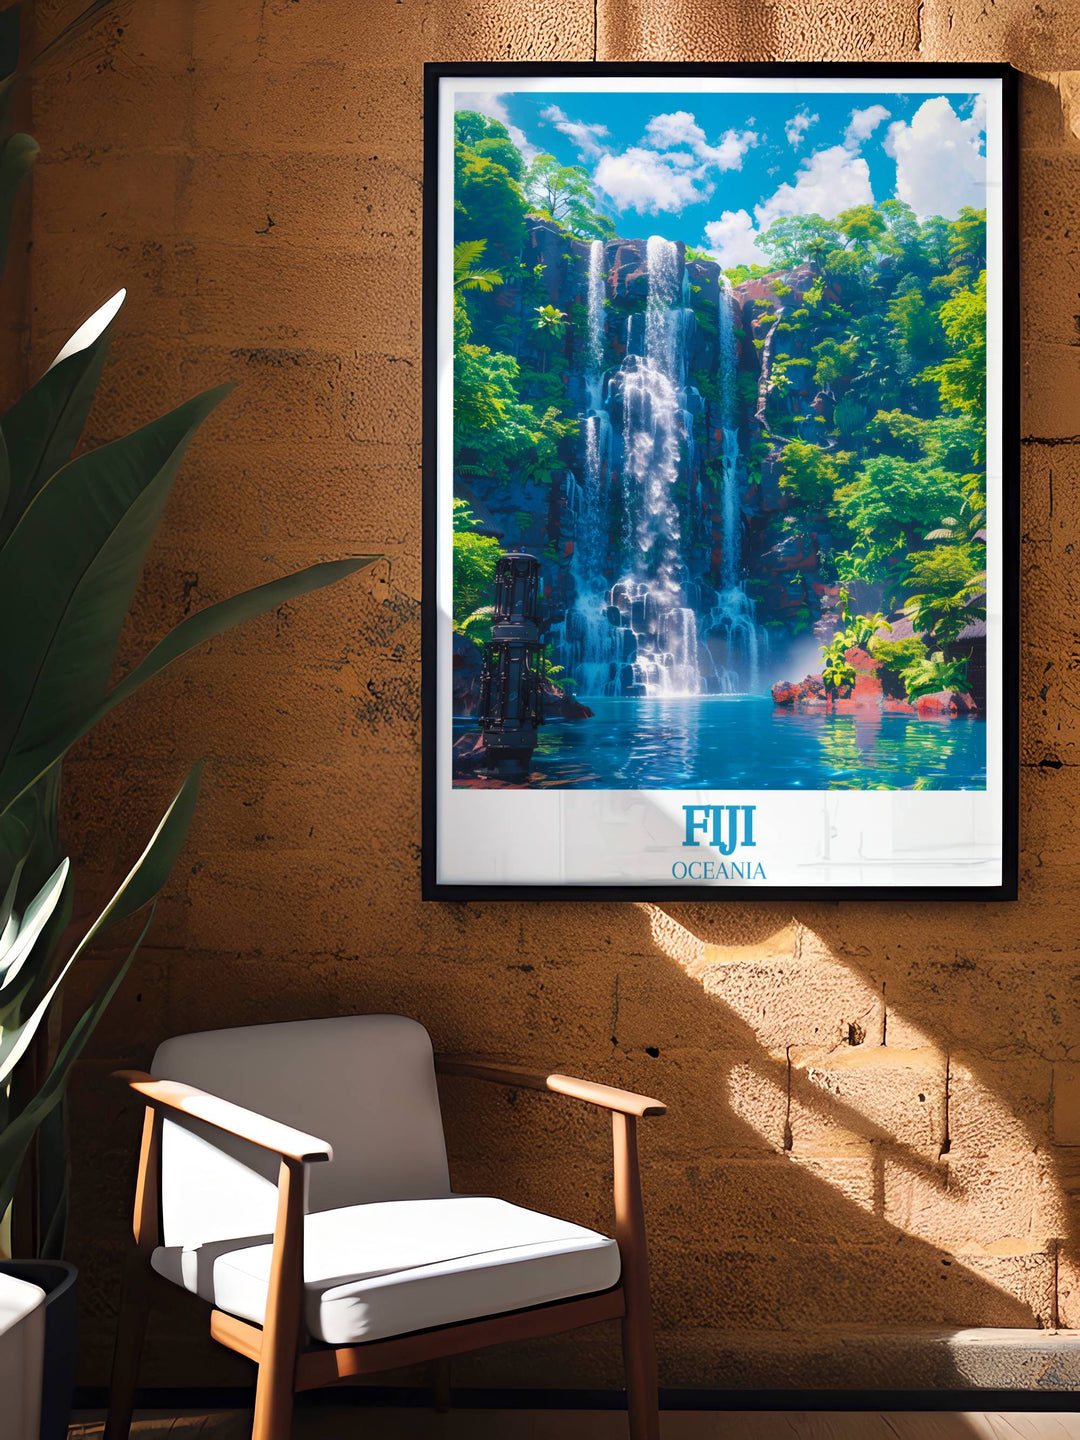 Unique Fiji Gift Artwork of Tavoro Falls a thoughtful present for art lovers and those mesmerized by the majestic landscapes of the South Pacific and Hawaii